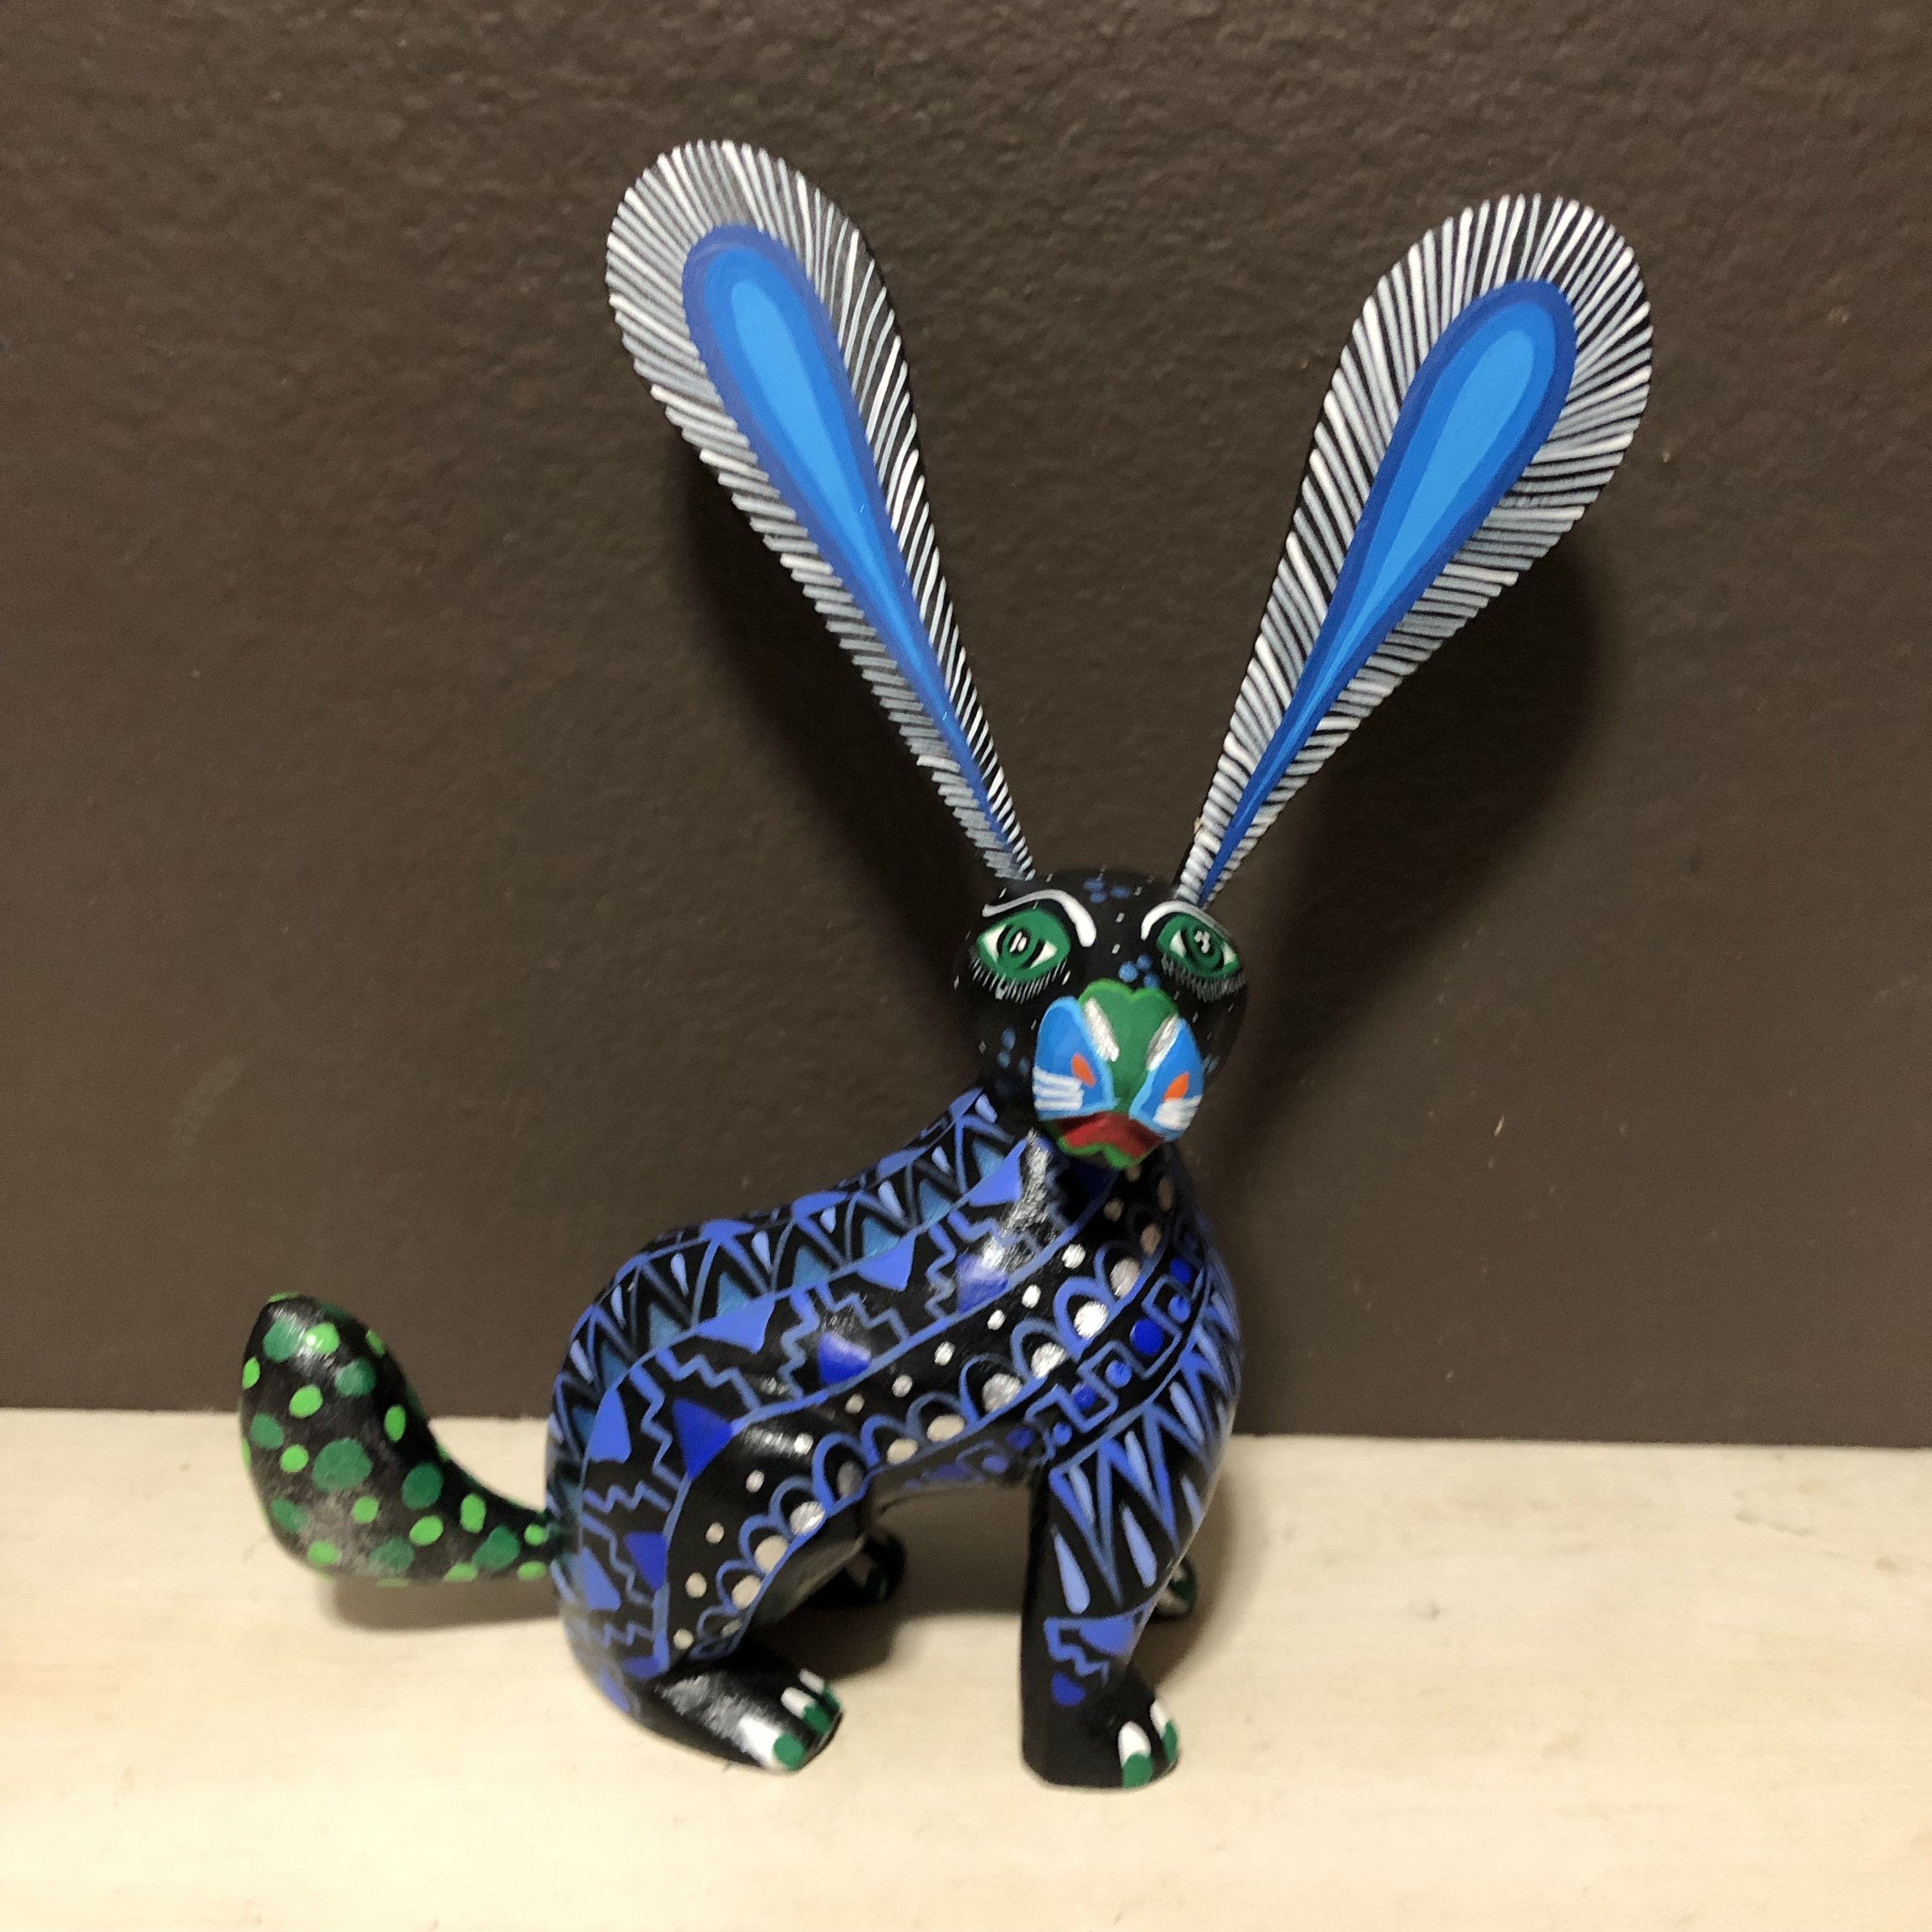 Alebrije Rabbit Handcrafted Wood Carving by Zeny Fuentes & Reyna Piña from Oaxaca Mexico.